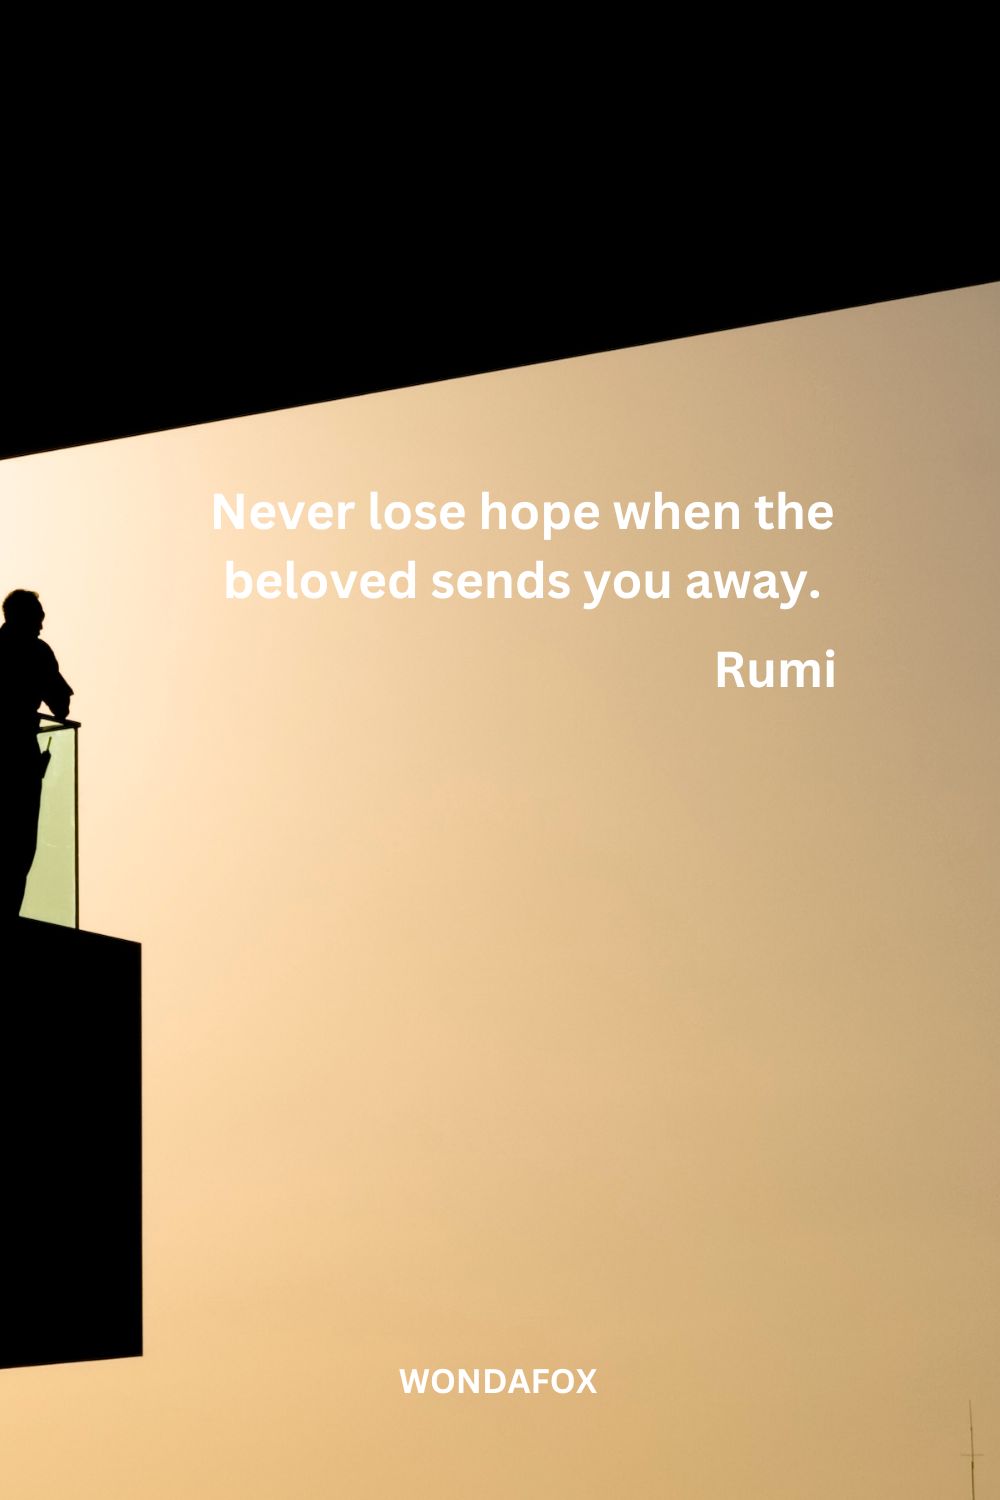 Never lose hope when the beloved sends you away.
Rumi